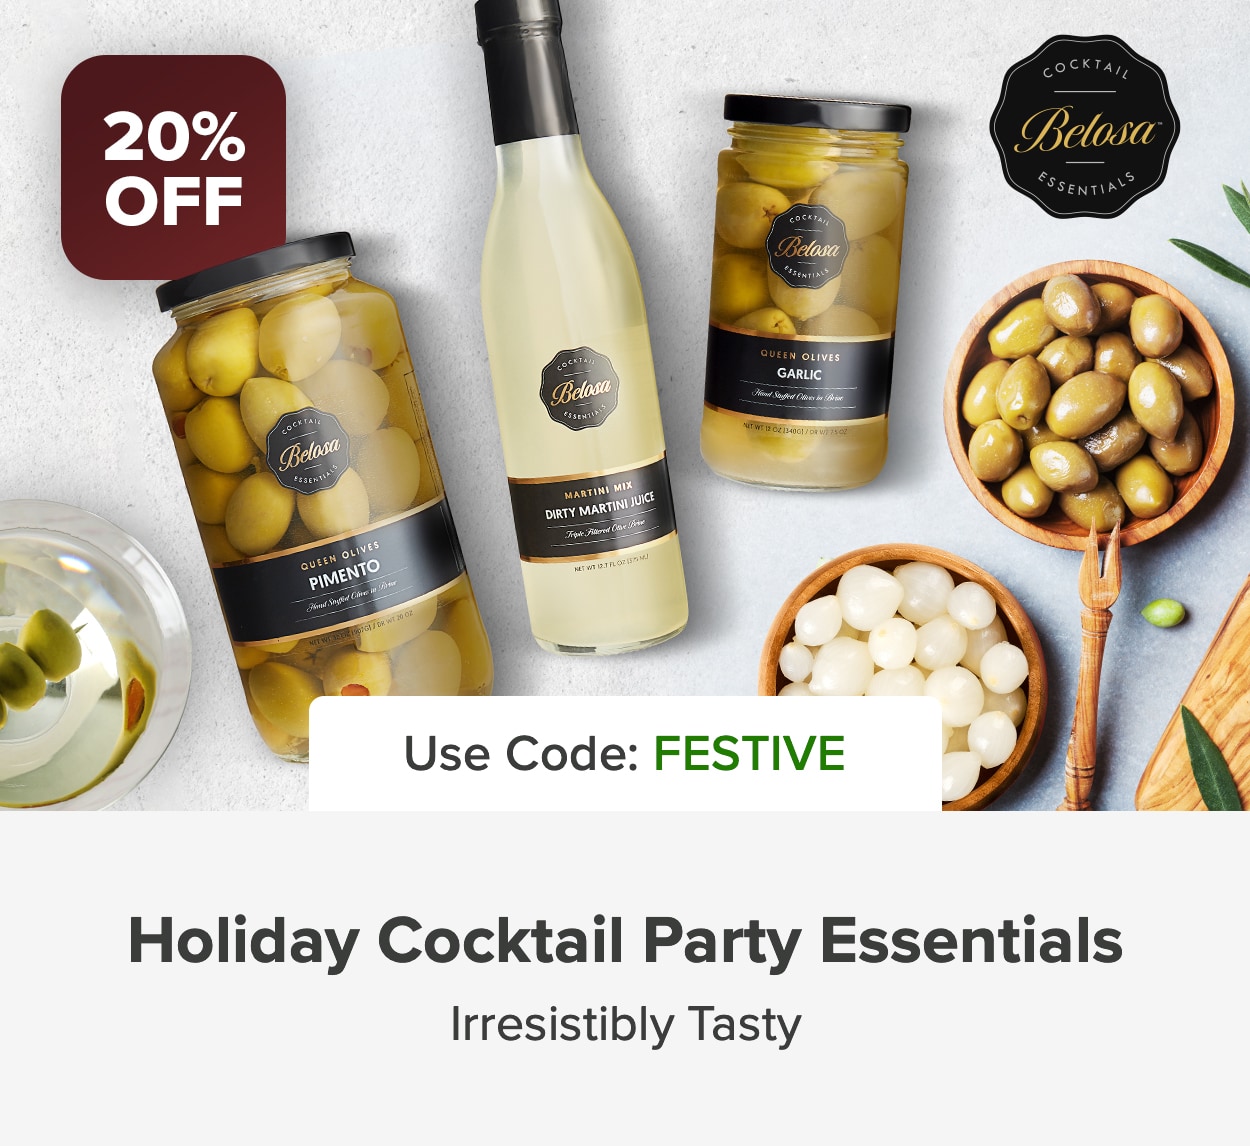 Equip Your Restaurant or Bar with 20% OFF Holiday Cocktail Essentials like Olives, Martini Juice, & More